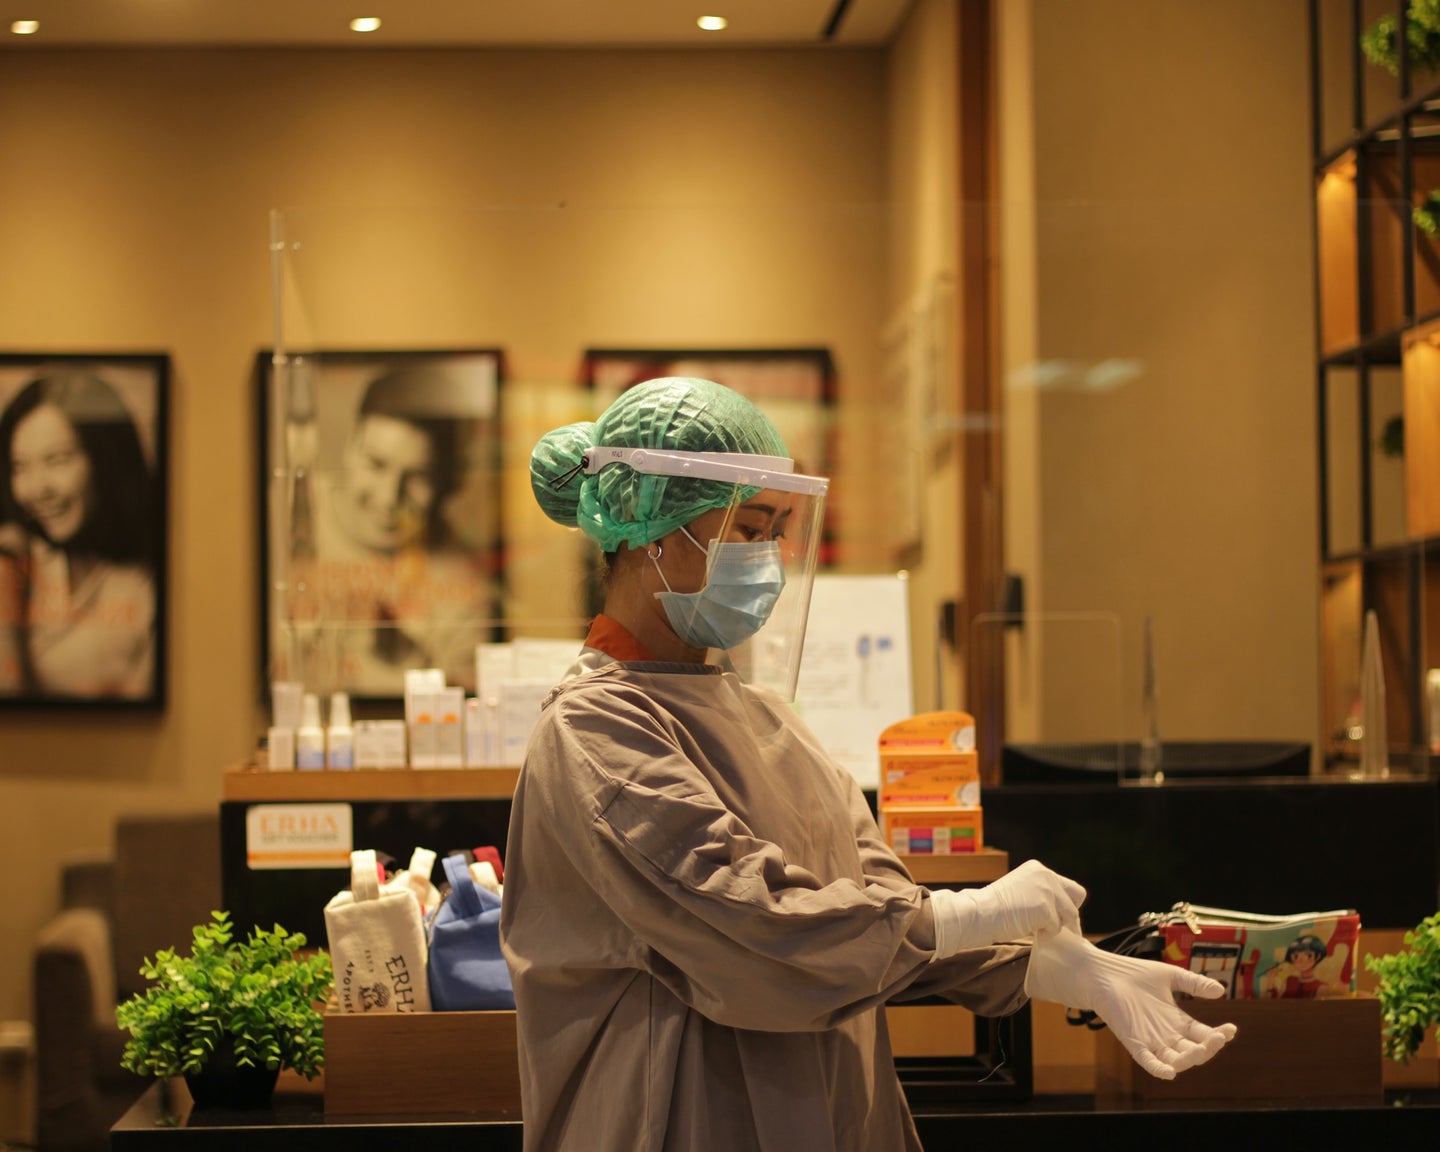 A person wearing a surgical hair net, face mask, face shield and protective surgical gown pulls on surgical gloves while standing in a health clinic.